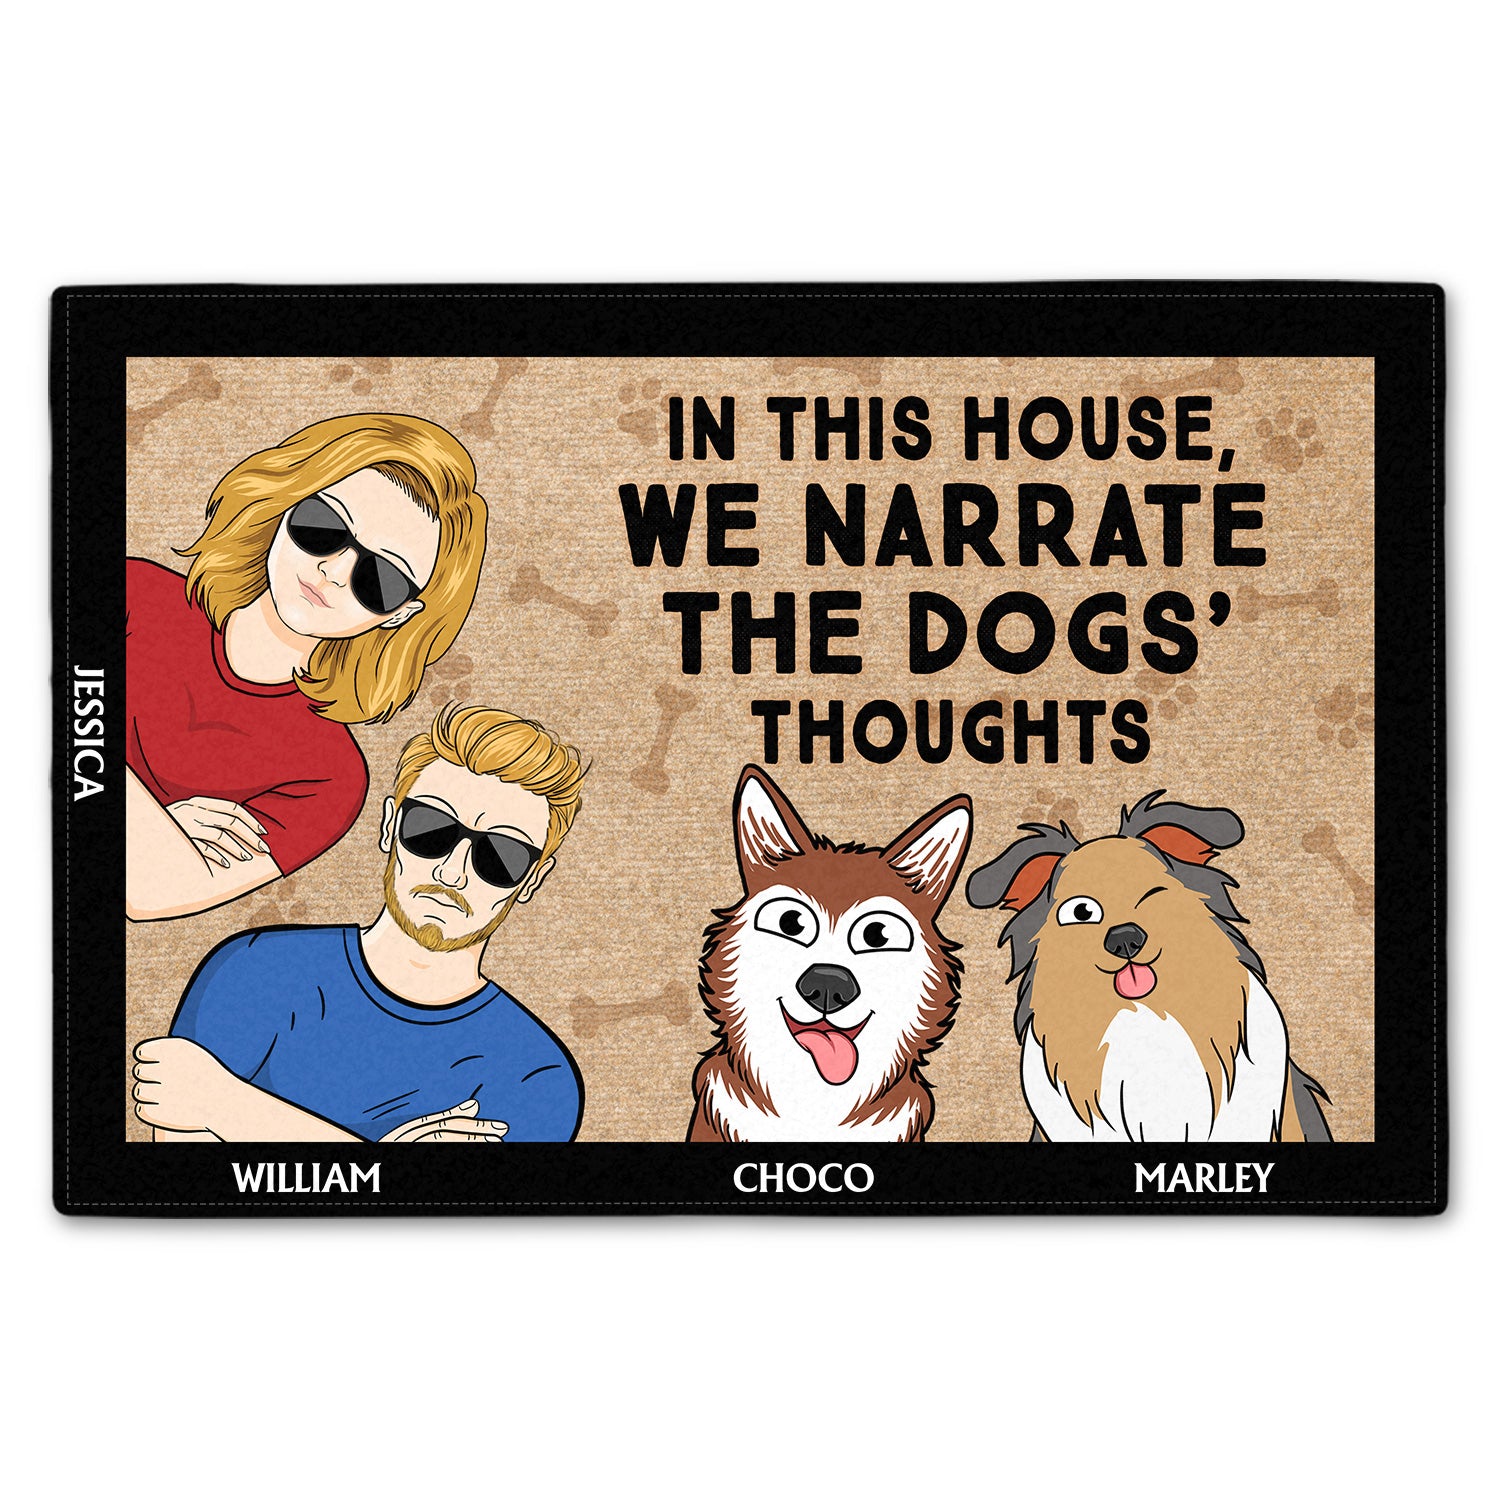 In This House We Narrate The Dogs' Thoughts - Gift For Dog Lovers, Couples - Personalized Doormat